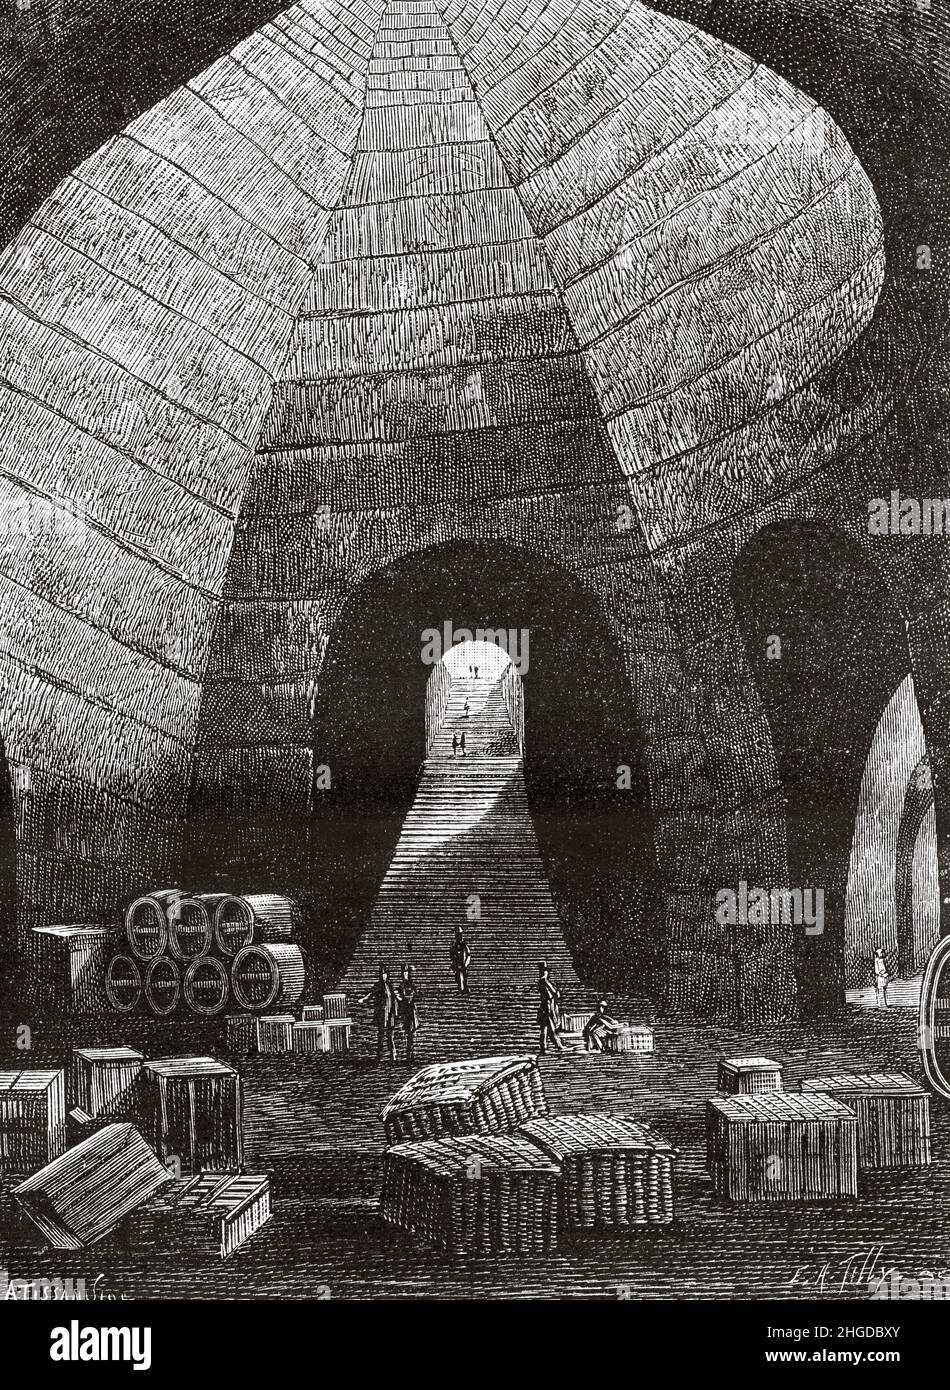 Theophile Roederer champagne cellars founded in Reims, 1864, France. Europe. Old 19th century engraved illustration from La Nature 1884 Stock Photo